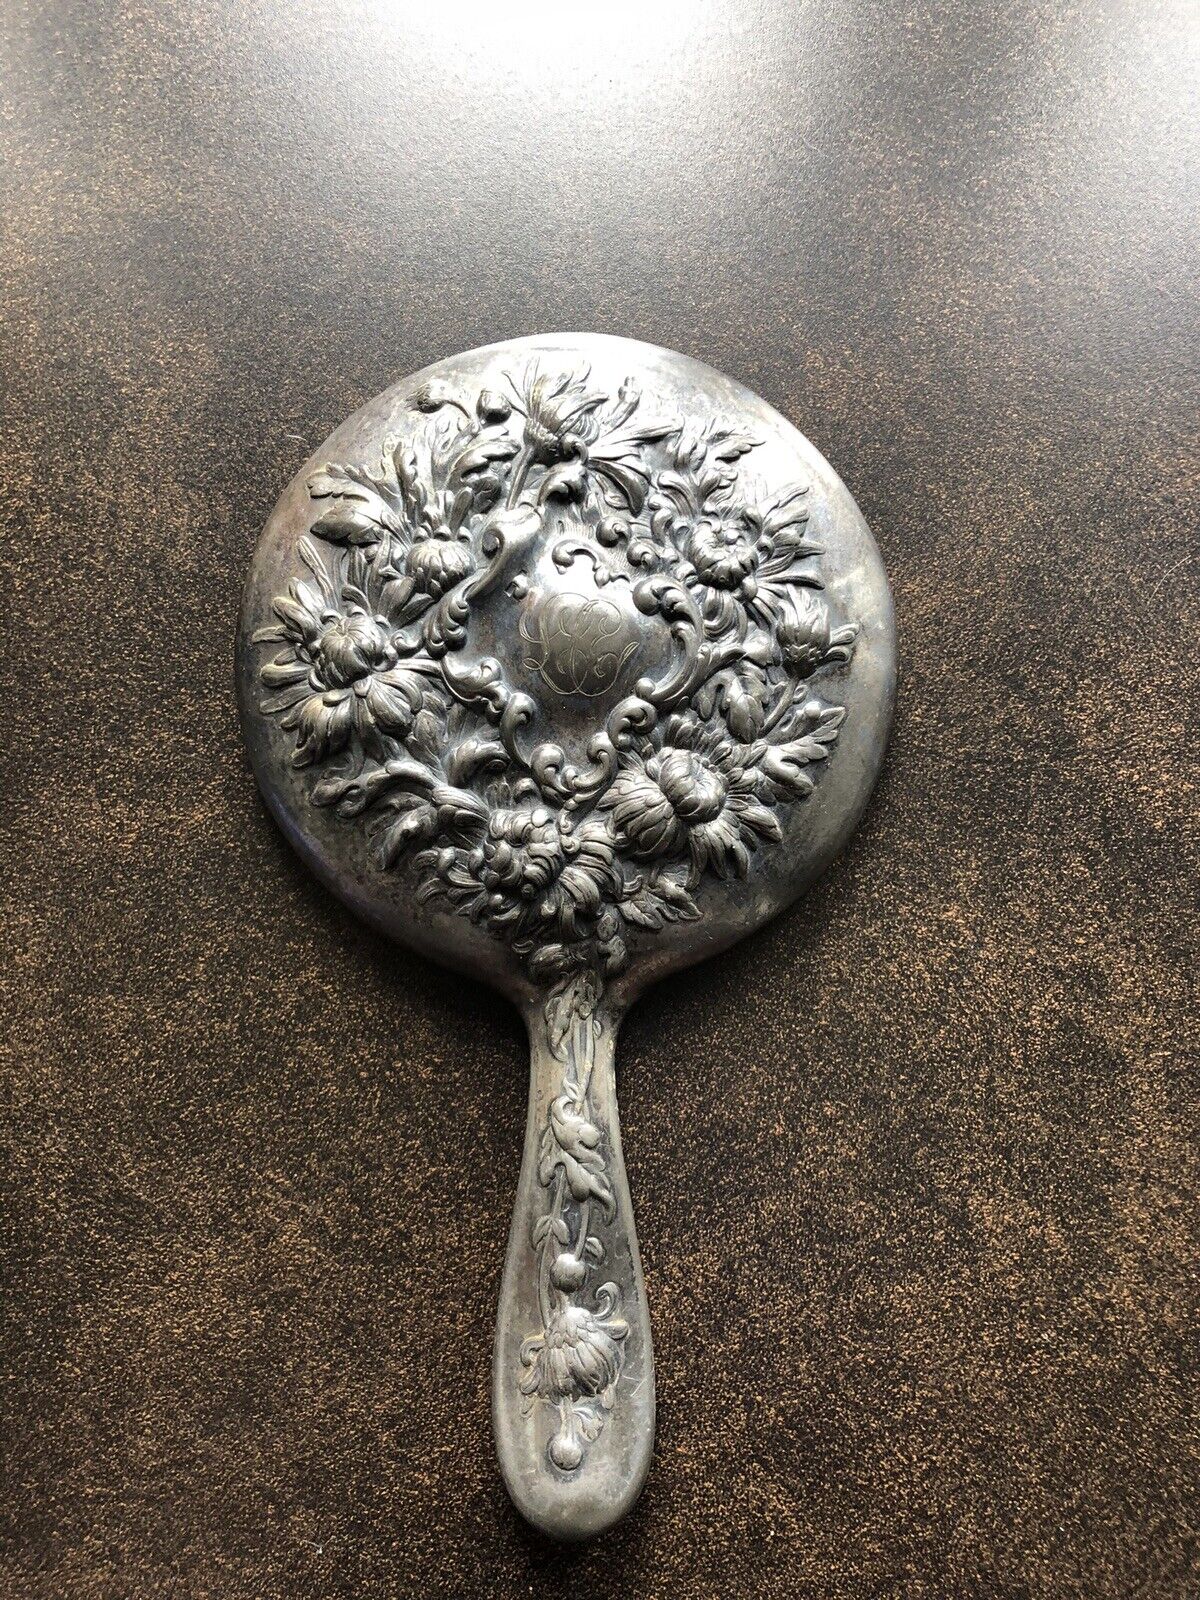 Reed & Barton #65? Repoussé Silverplate Hand Mirror Ornate Floral Antique Vanity